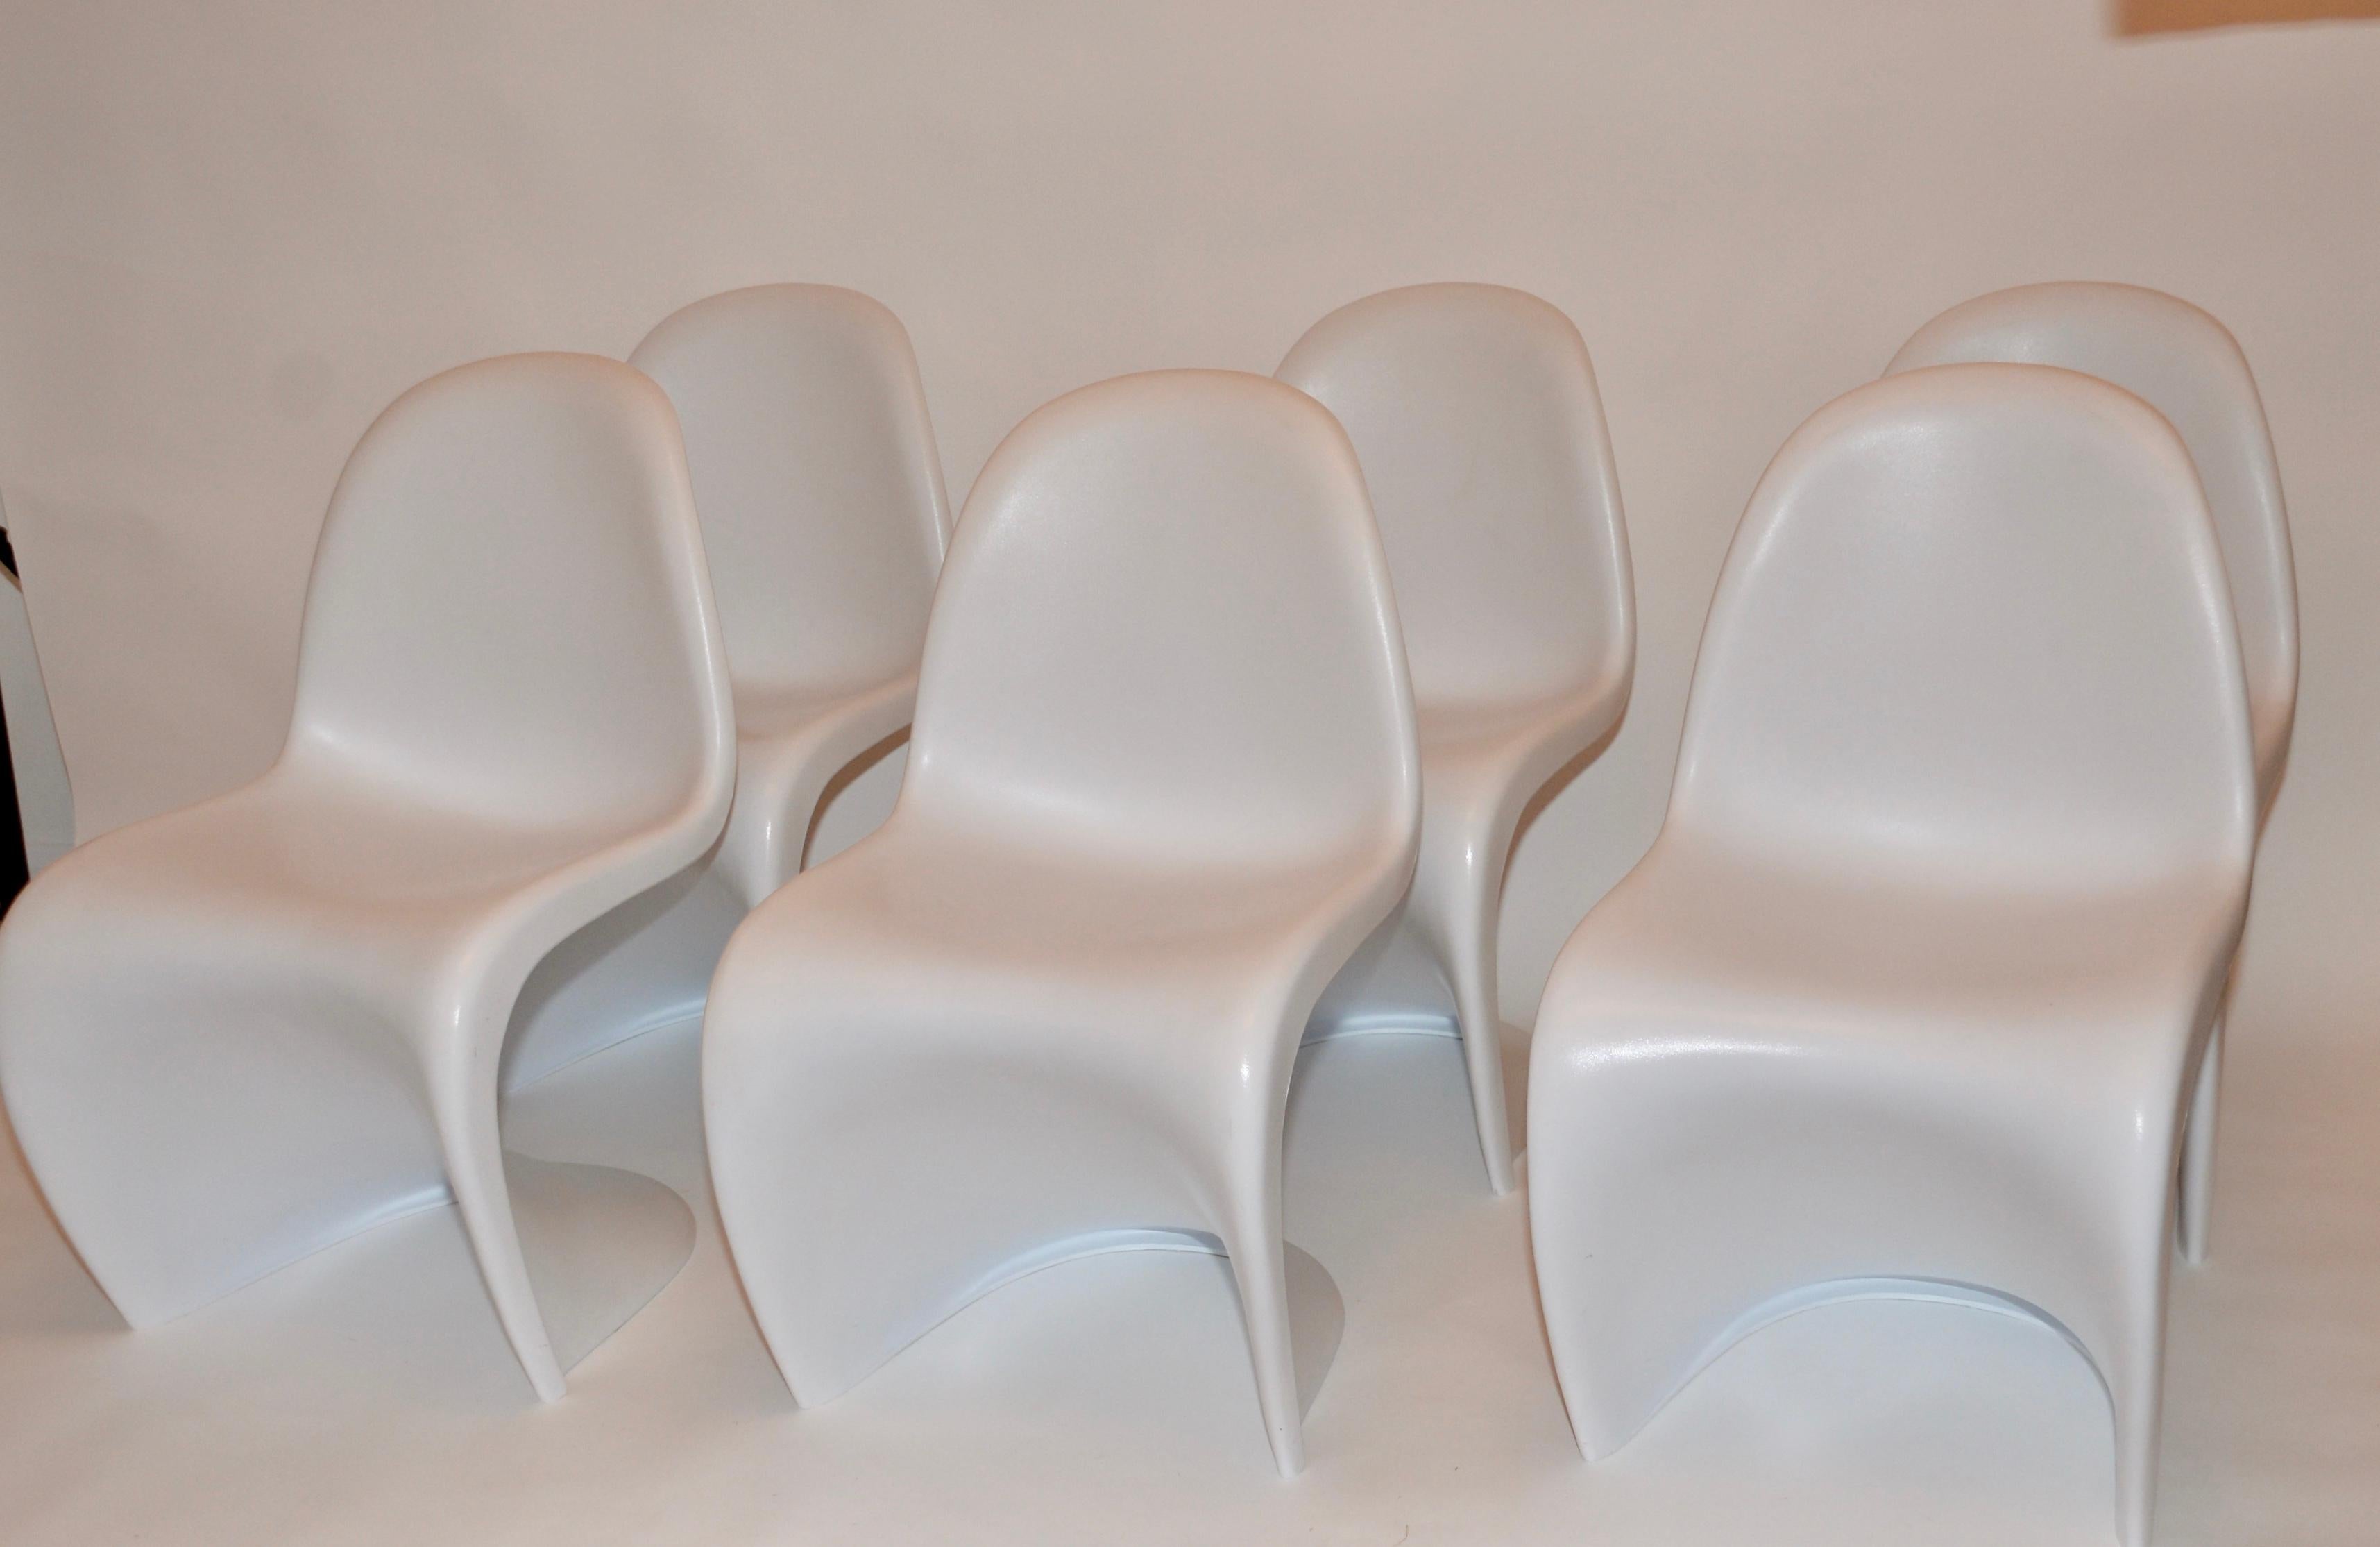 A set of six Verner Panton inspired S chairs. These are a replica of the original iconic white stacking chairs by the influential Danish designer Verner Panton. These cantilevered chairs are stackable and are a fabulous replica of the original